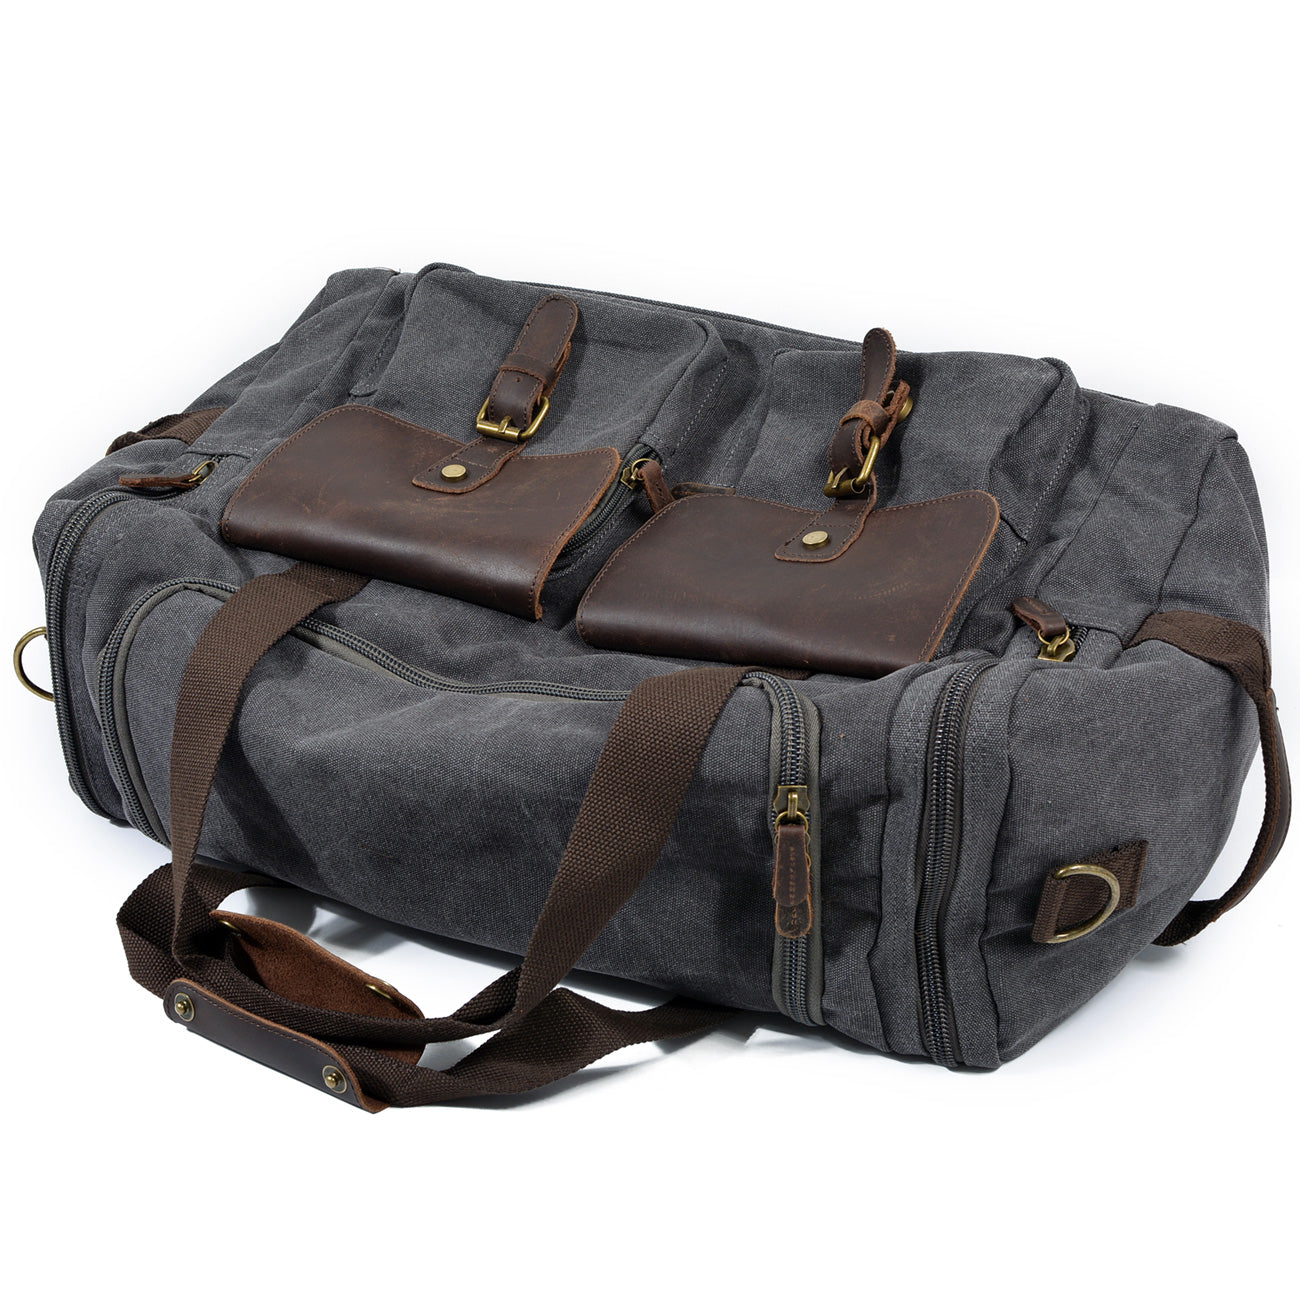 retro and lightweight mens weekend luggage made of tanned real leather